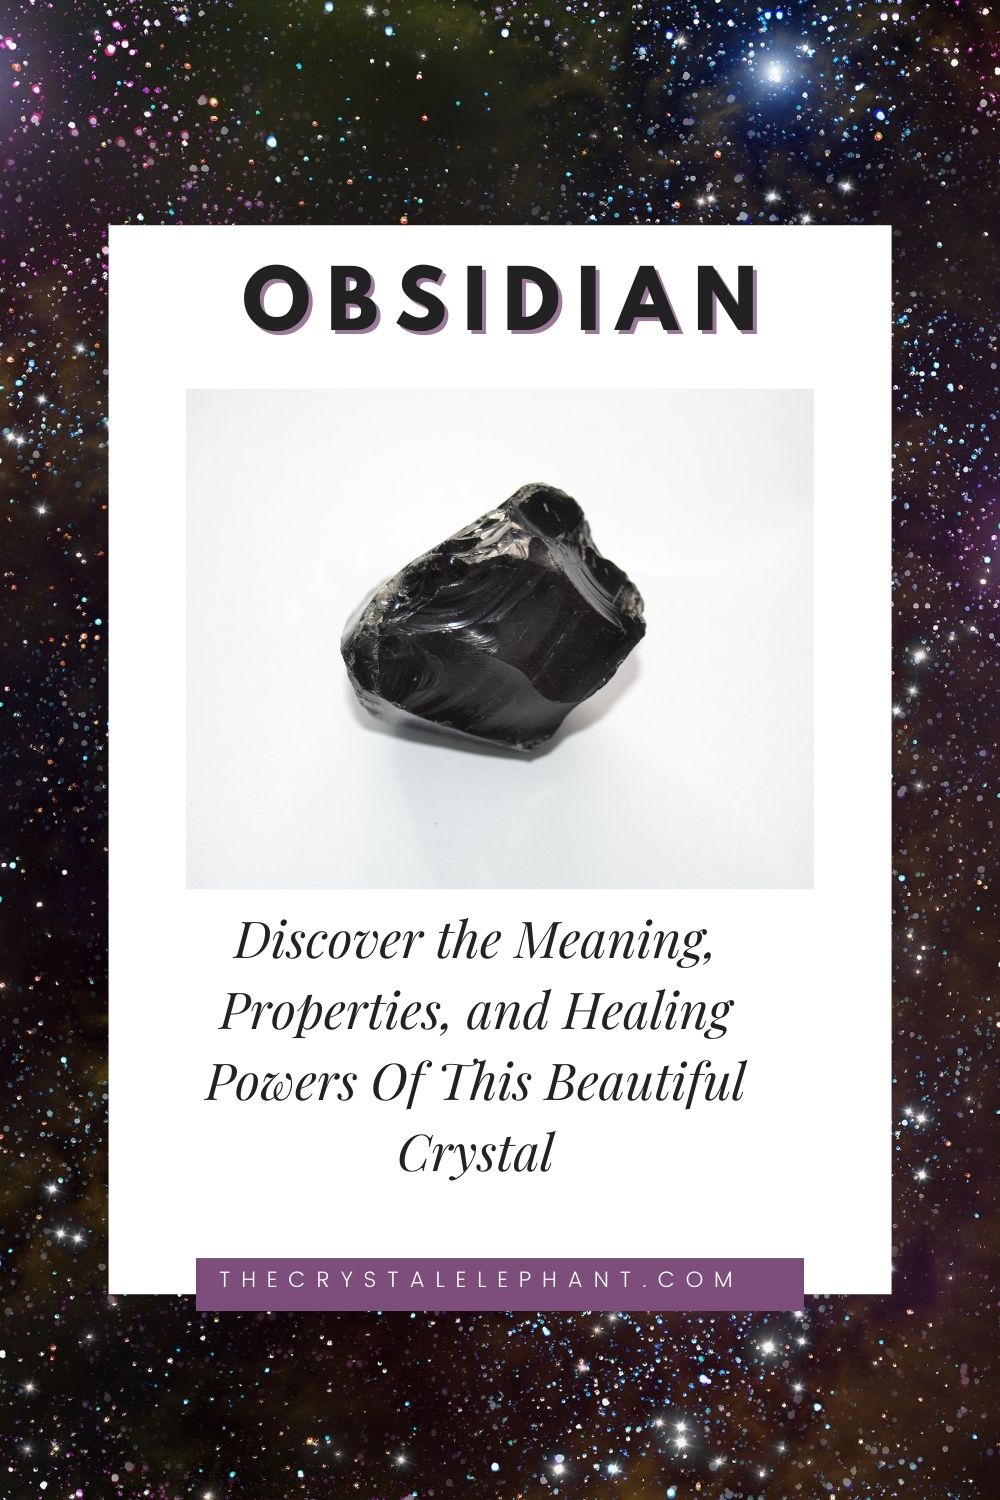 obsidian meaning, properties and benefits